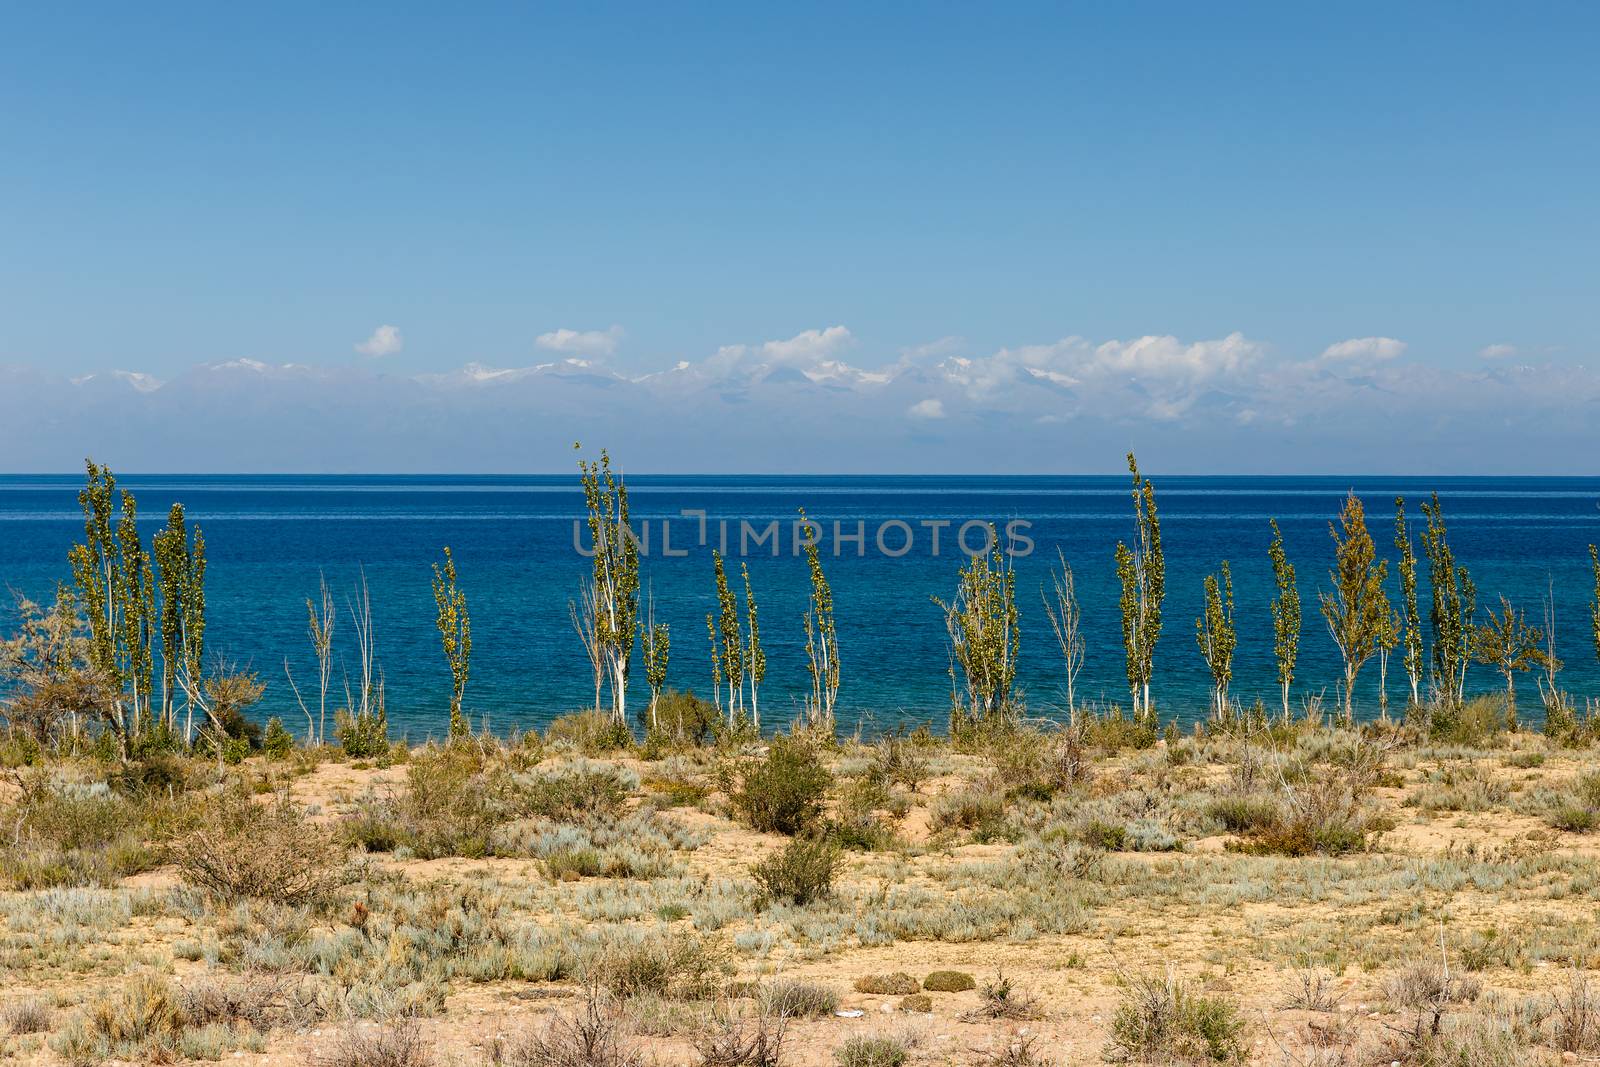 Lake Issyk-kul, Kyrgyzstan, the largest lake in Kyrgyzstan, young poplar trees ashore